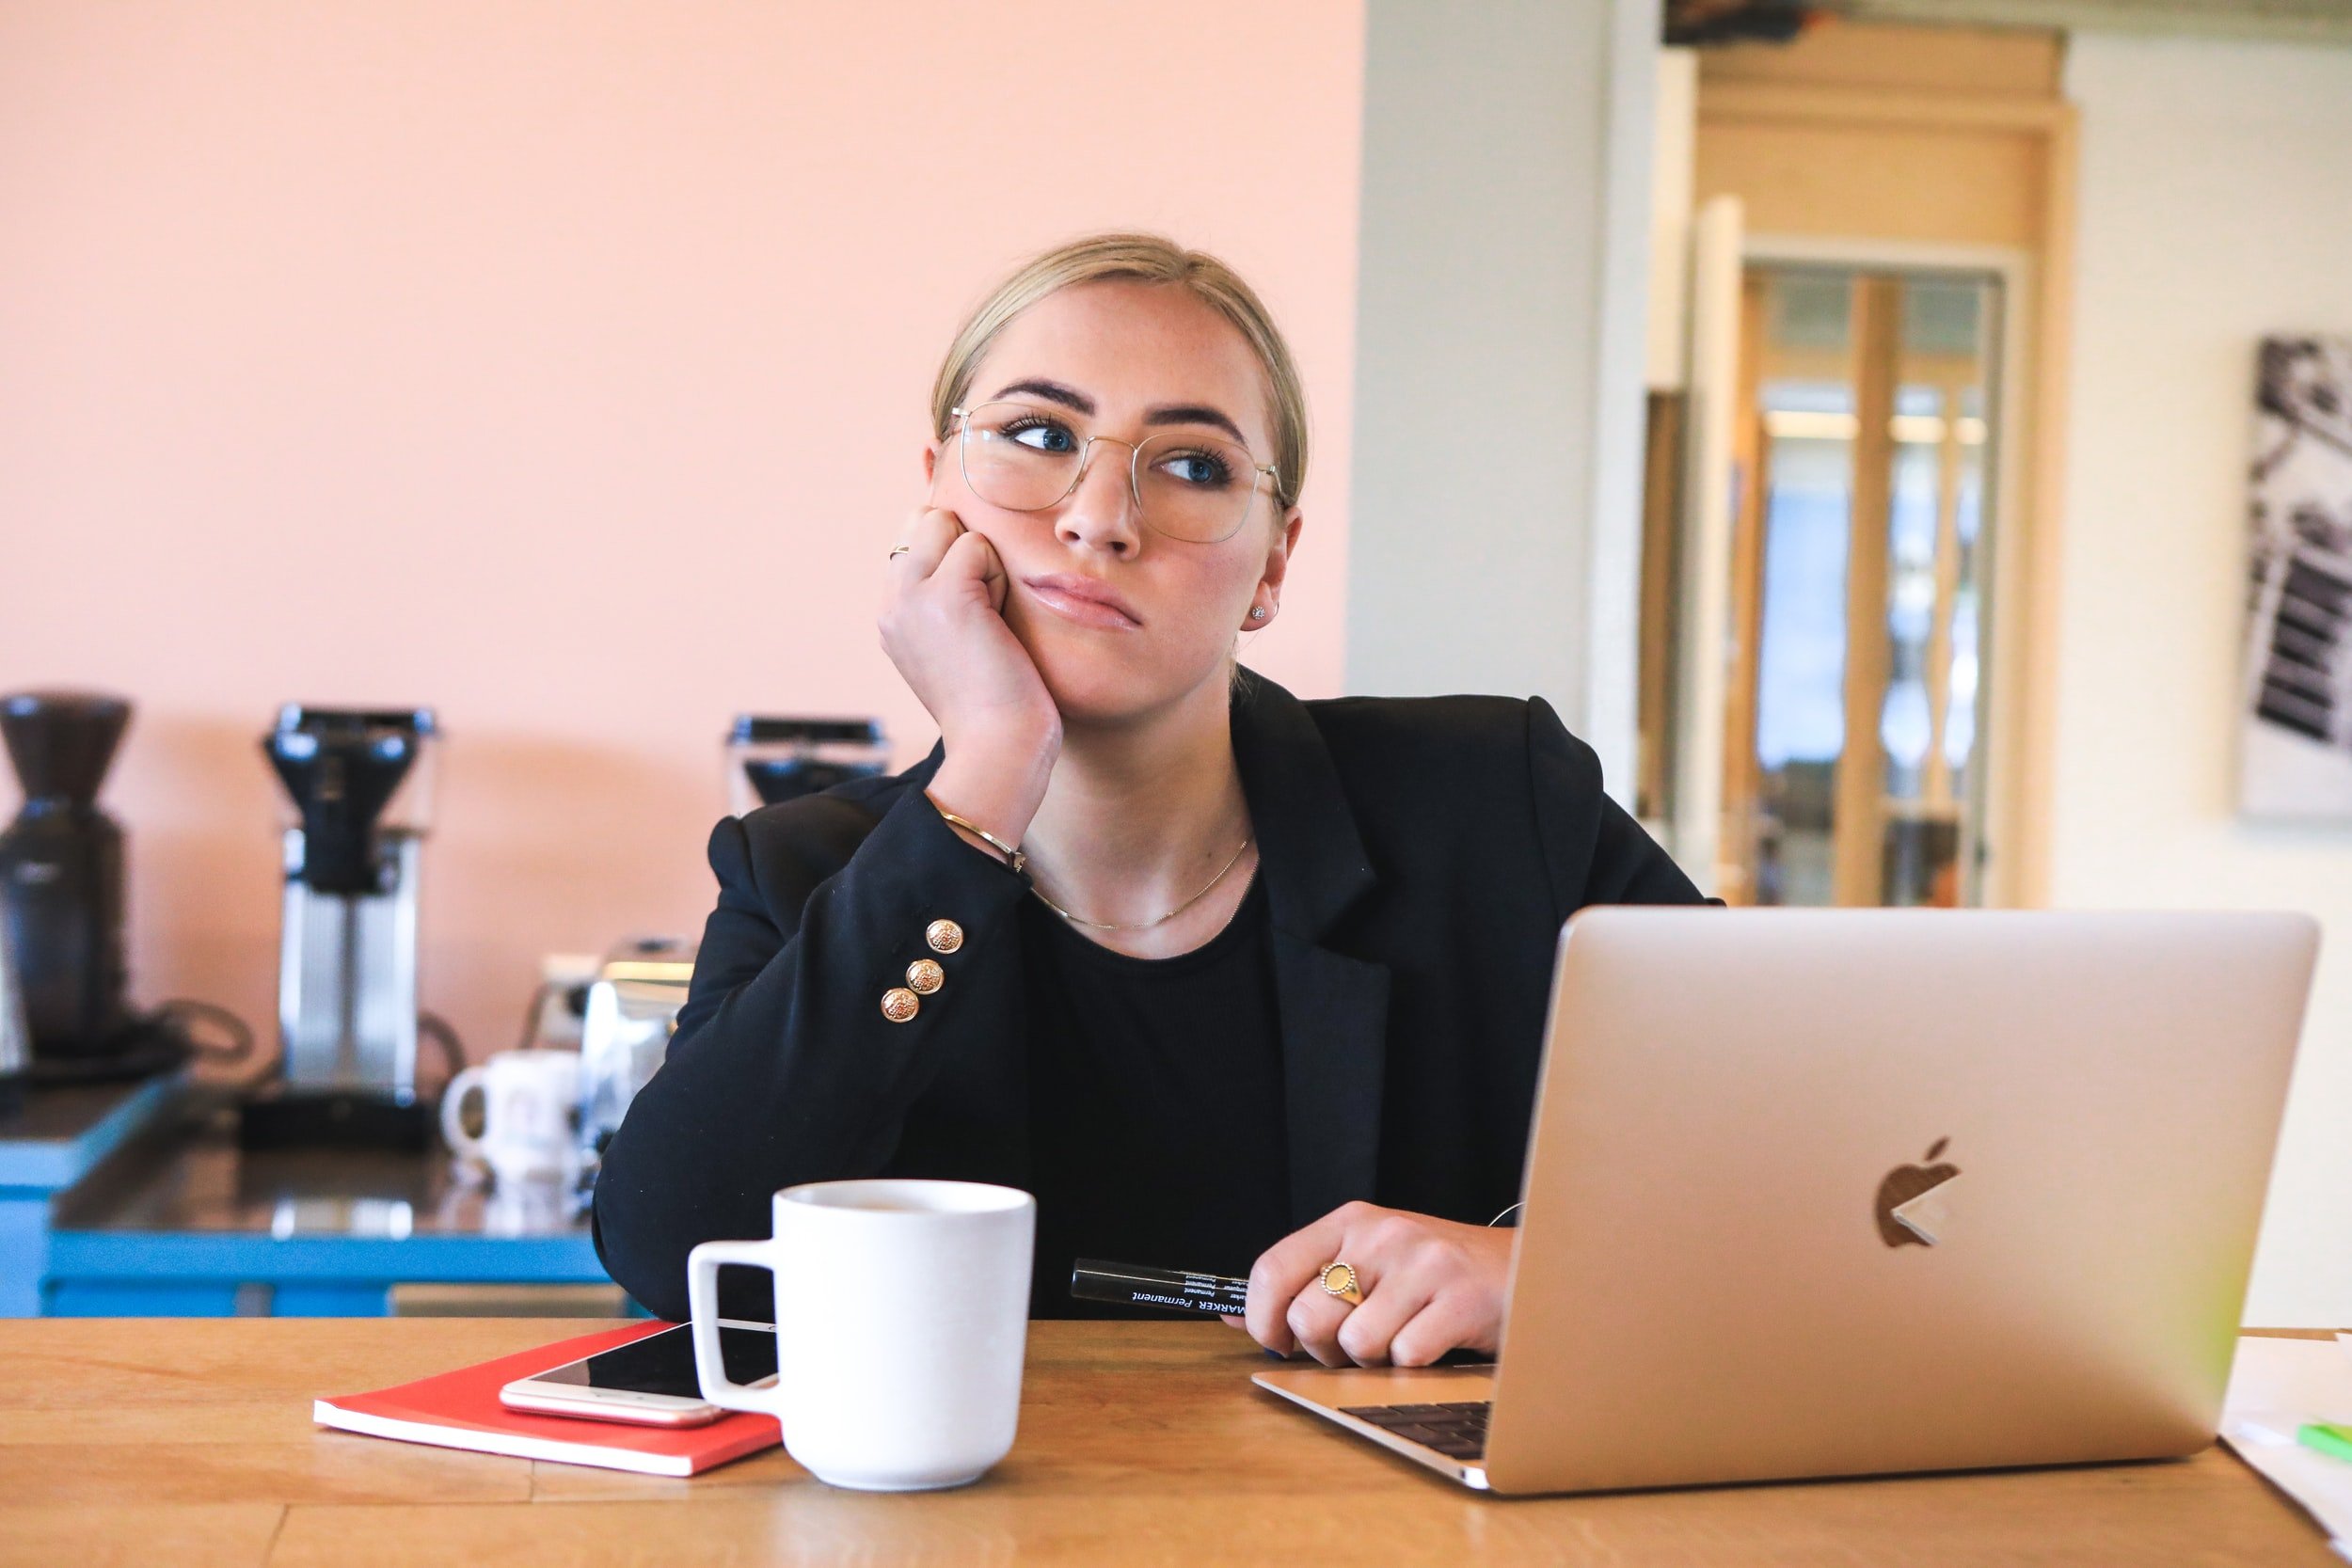 A young white woman sits behind a desk with her head in her palm. She appears to be a dejected job seeker wearing a suit and sitting behind a computer.